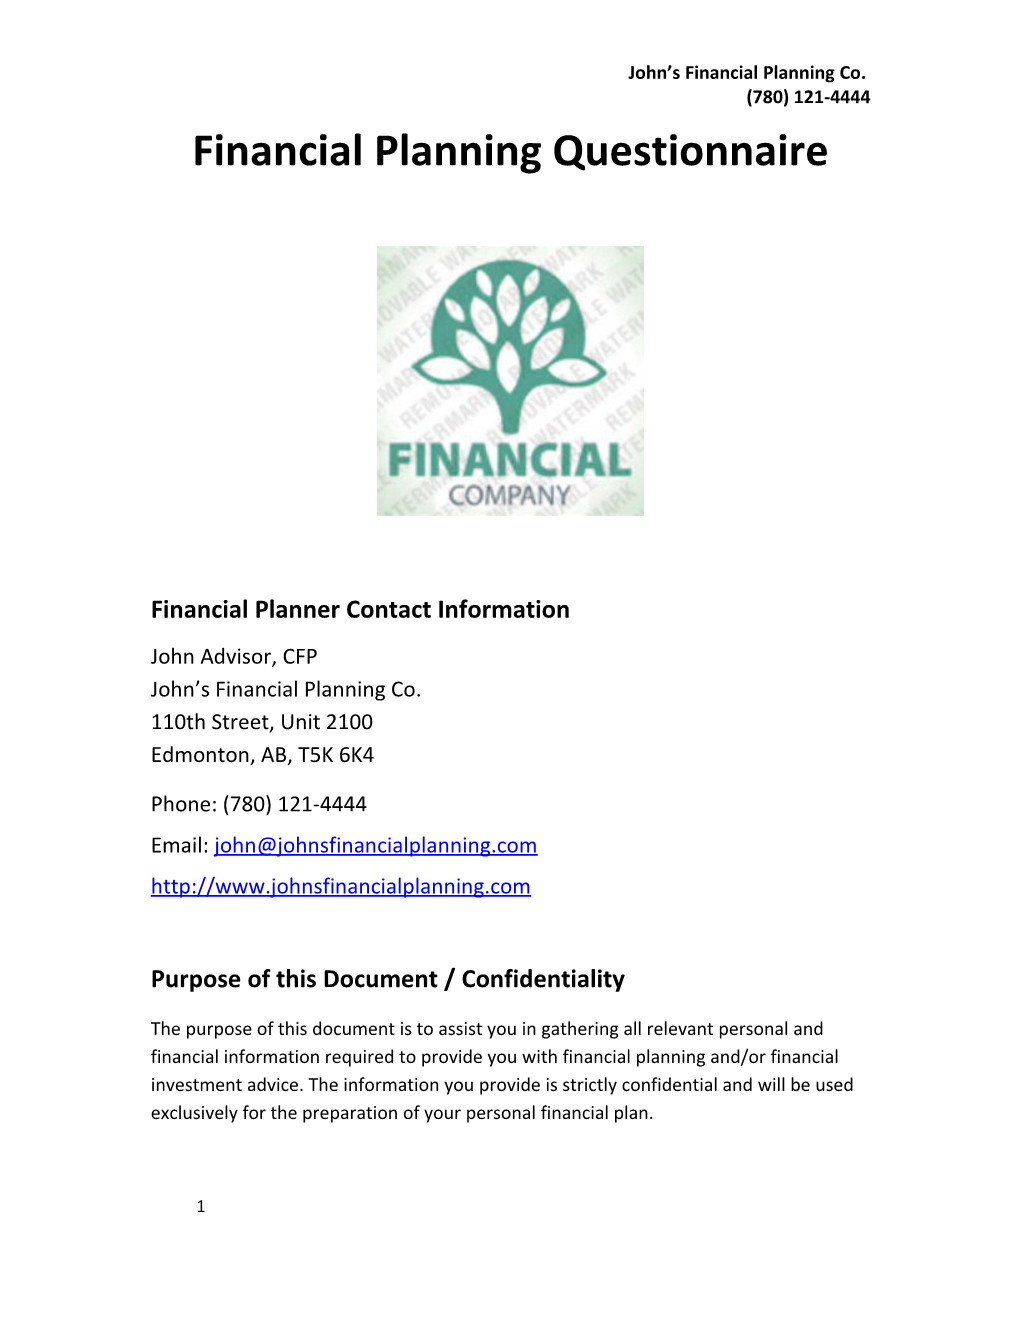 Financial Planner Contact Information